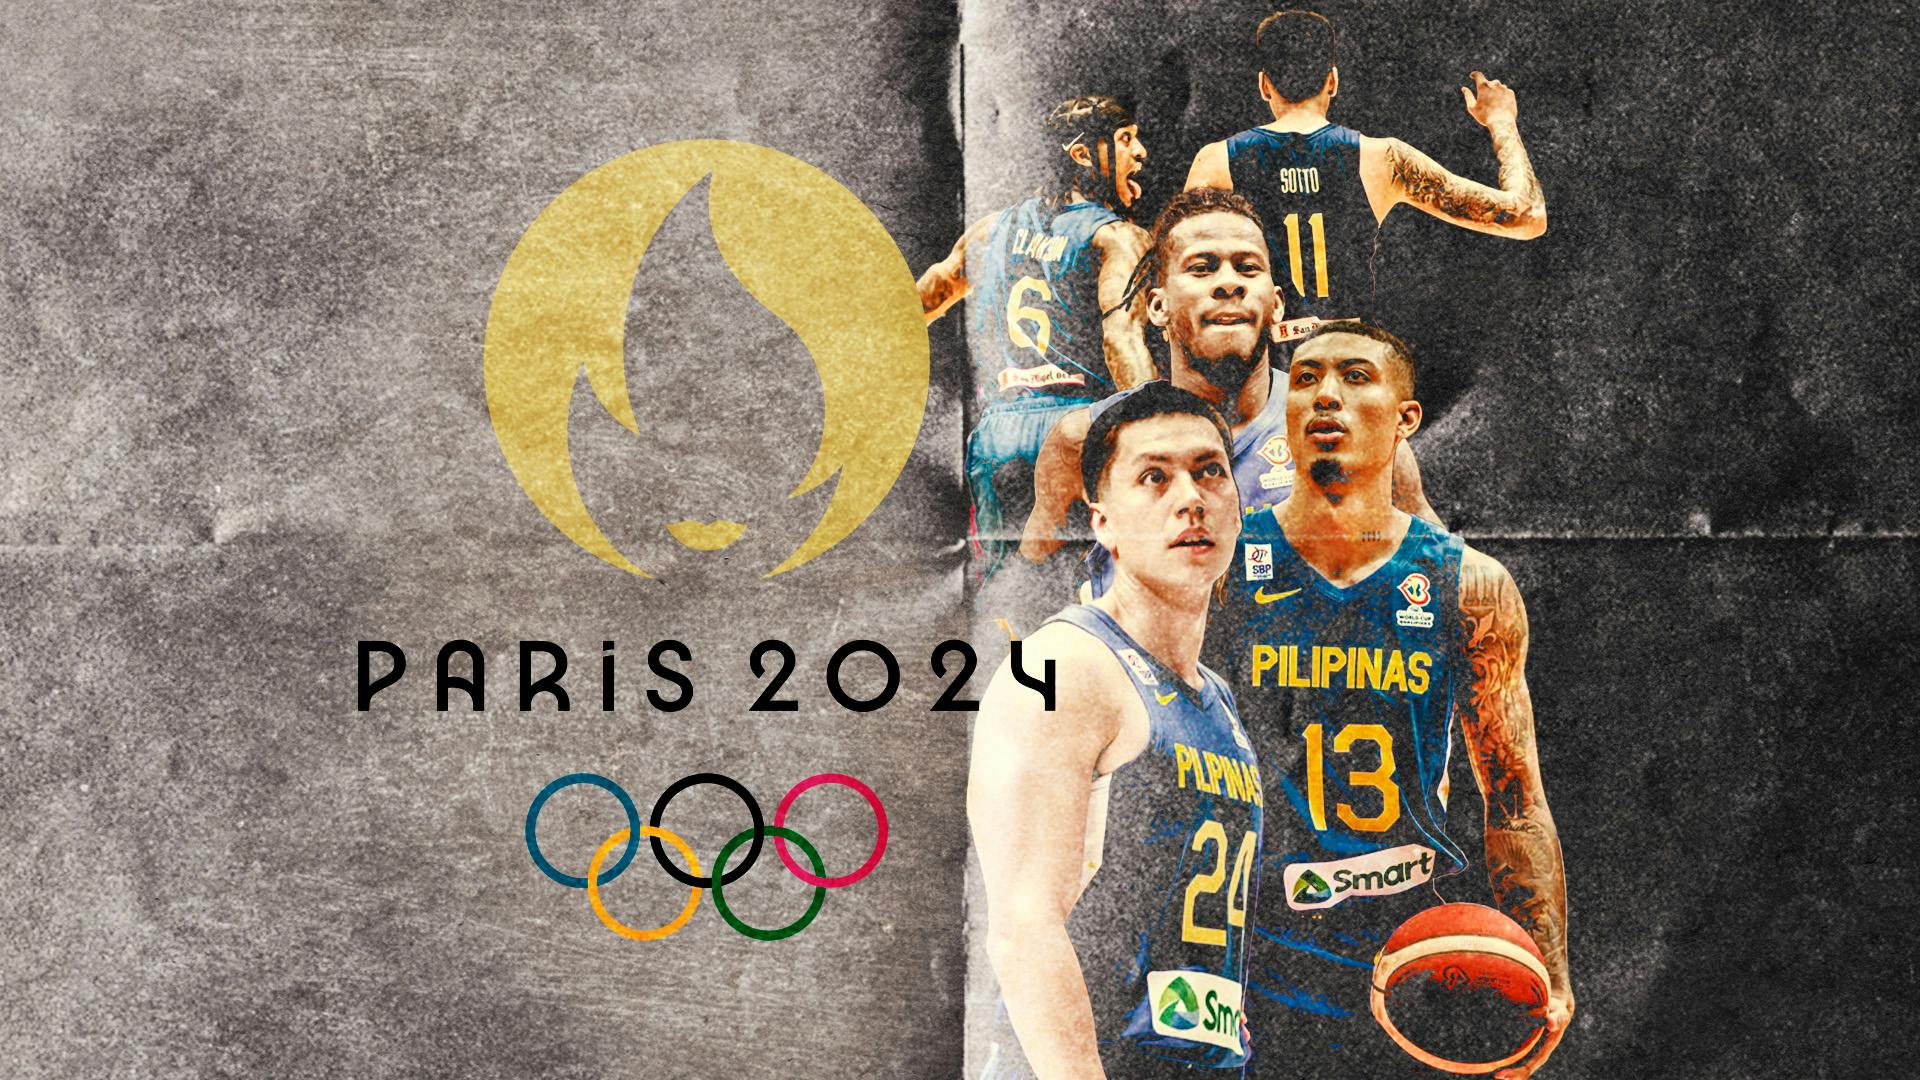 Road to Paris 2024: What Gilas Pilipinas needs to do in FIBA World Cup to secure Olympic slot